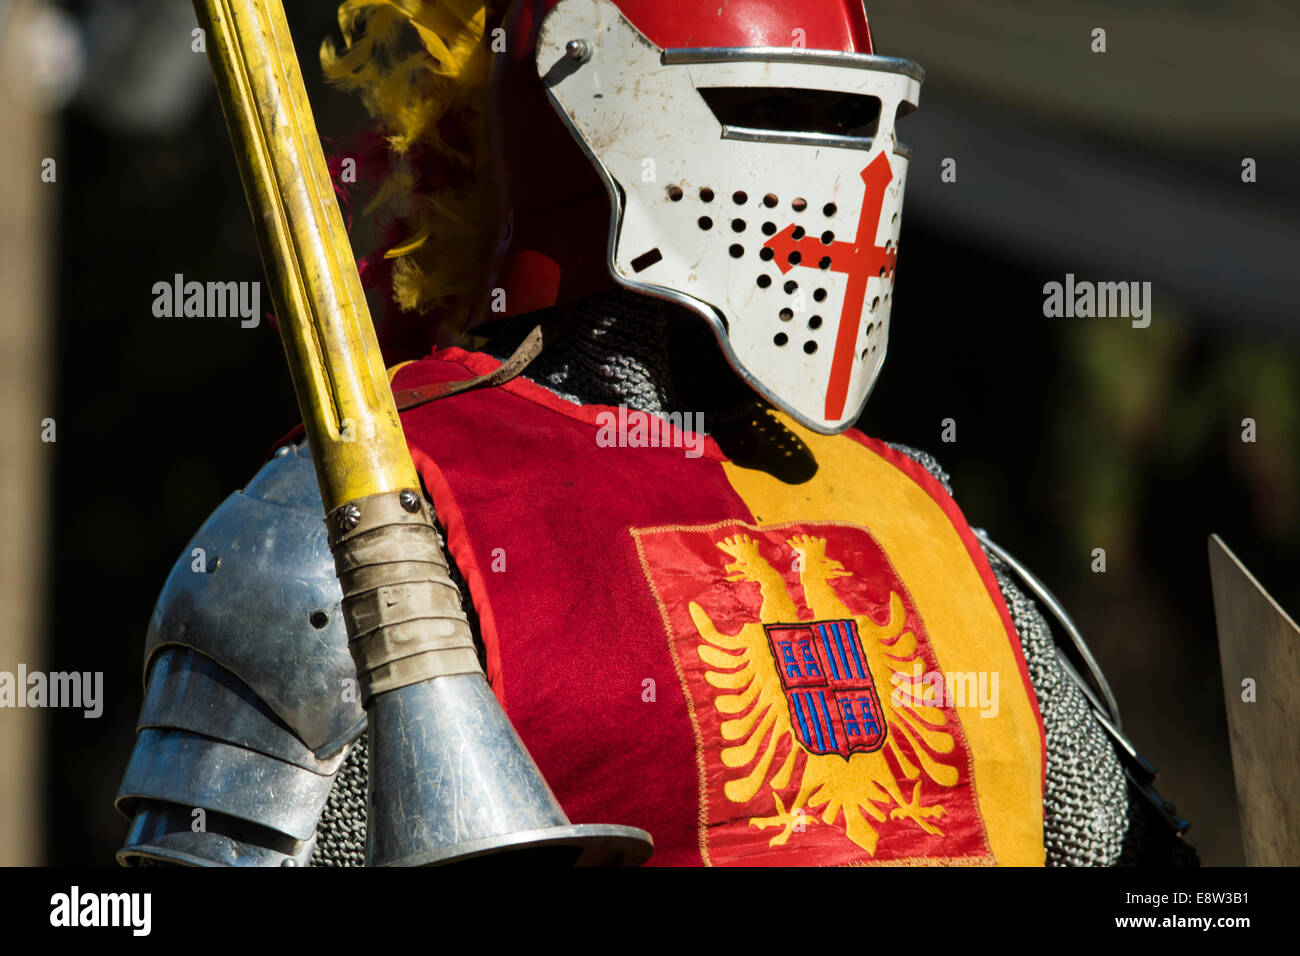 Waiting, The Red Knight. Stock Photo